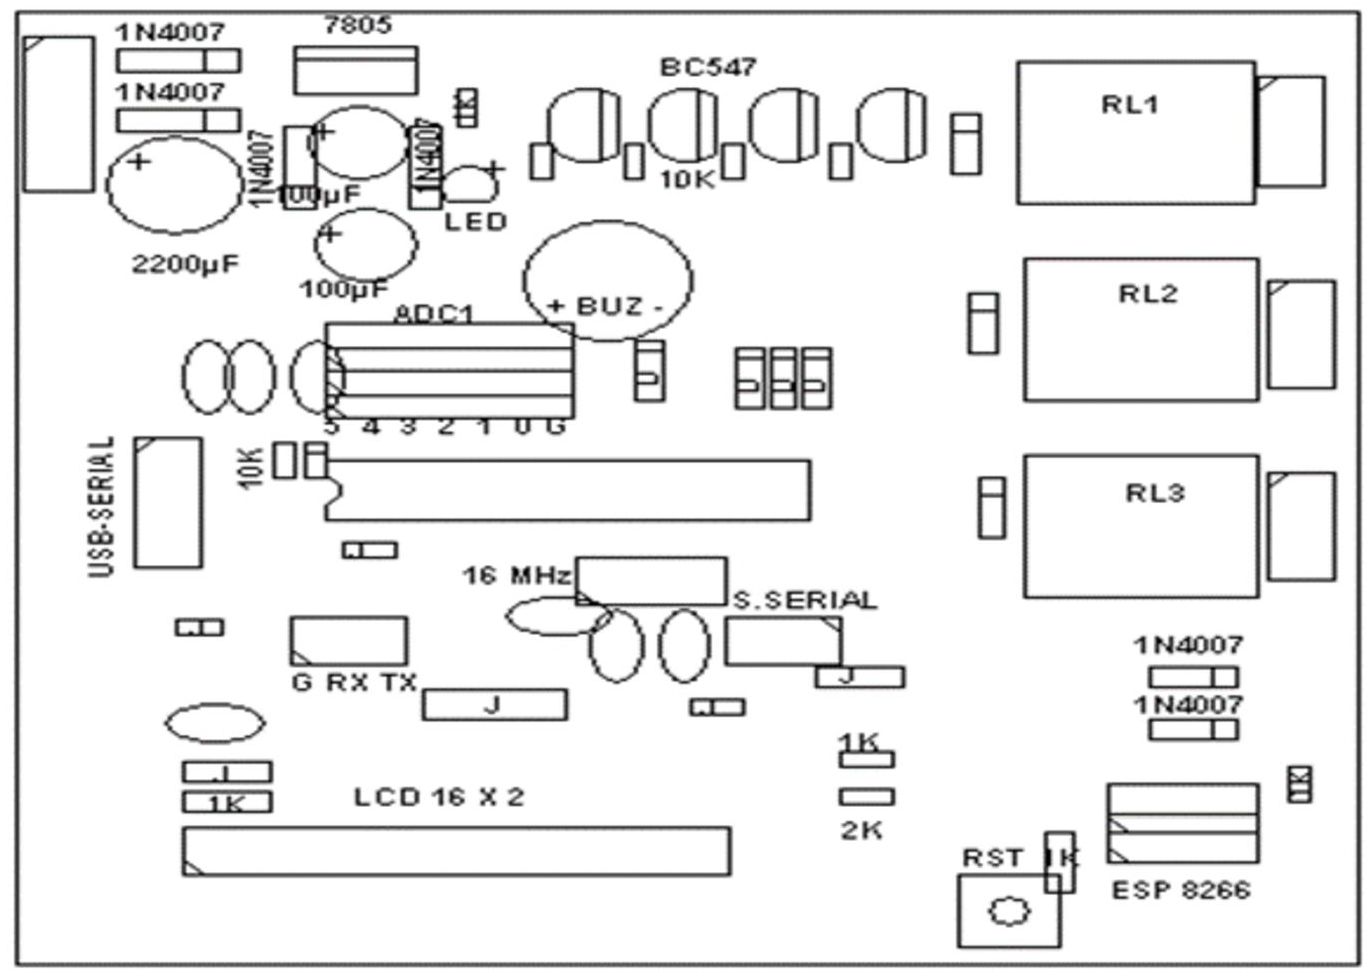 Schematic illustration of the layout of the Arduino UNO development board.